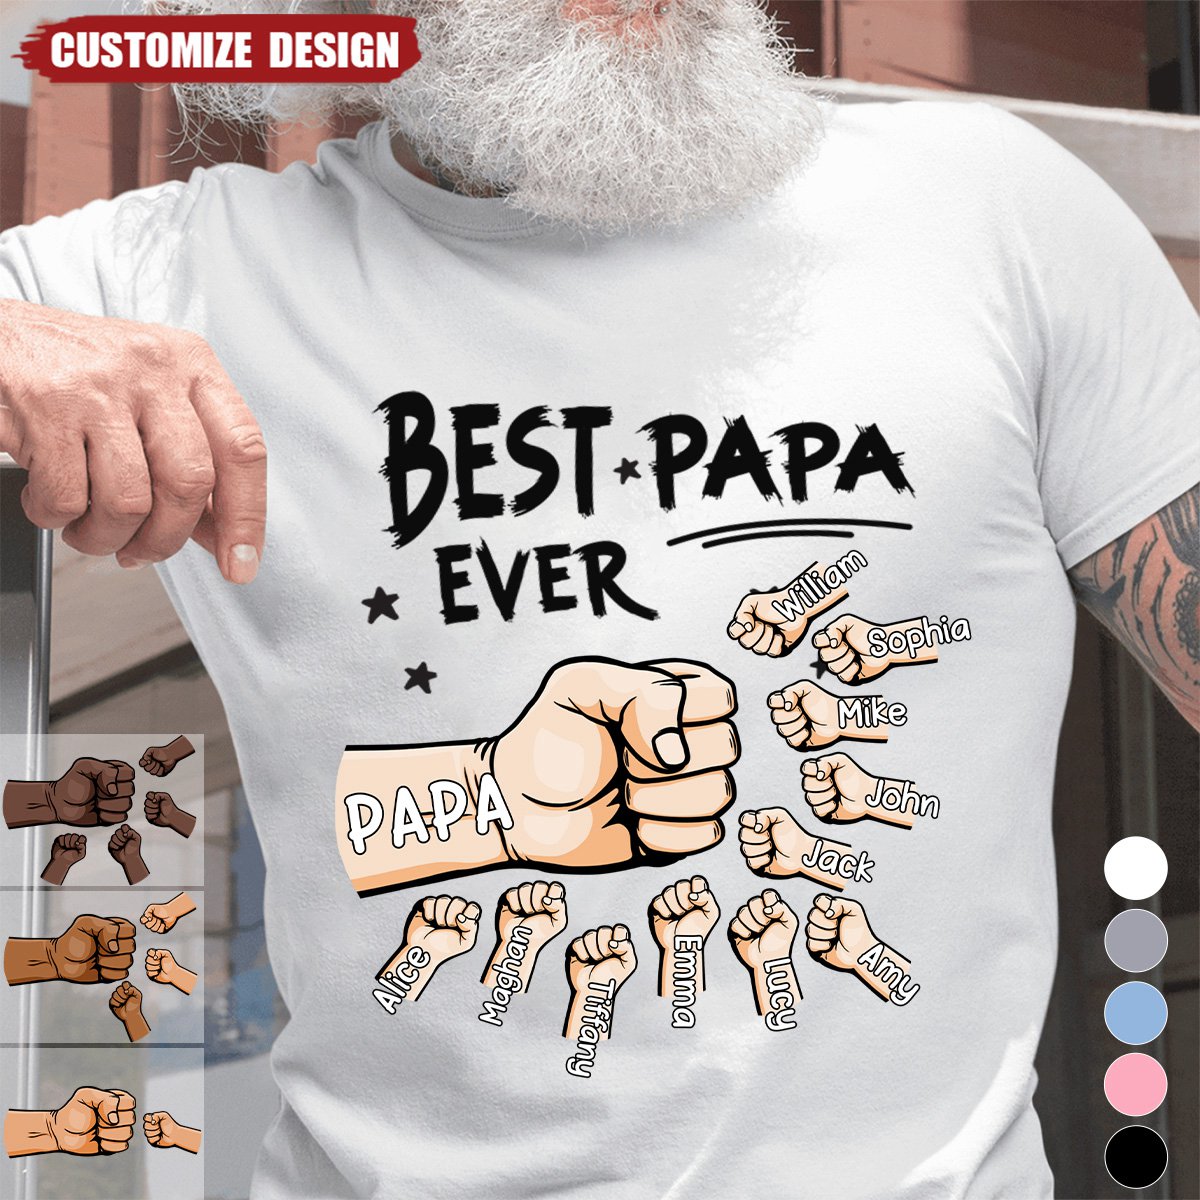 The Best Dad Ever - Personalized T-shirt - Father's Day, Birthday Gift For Dad